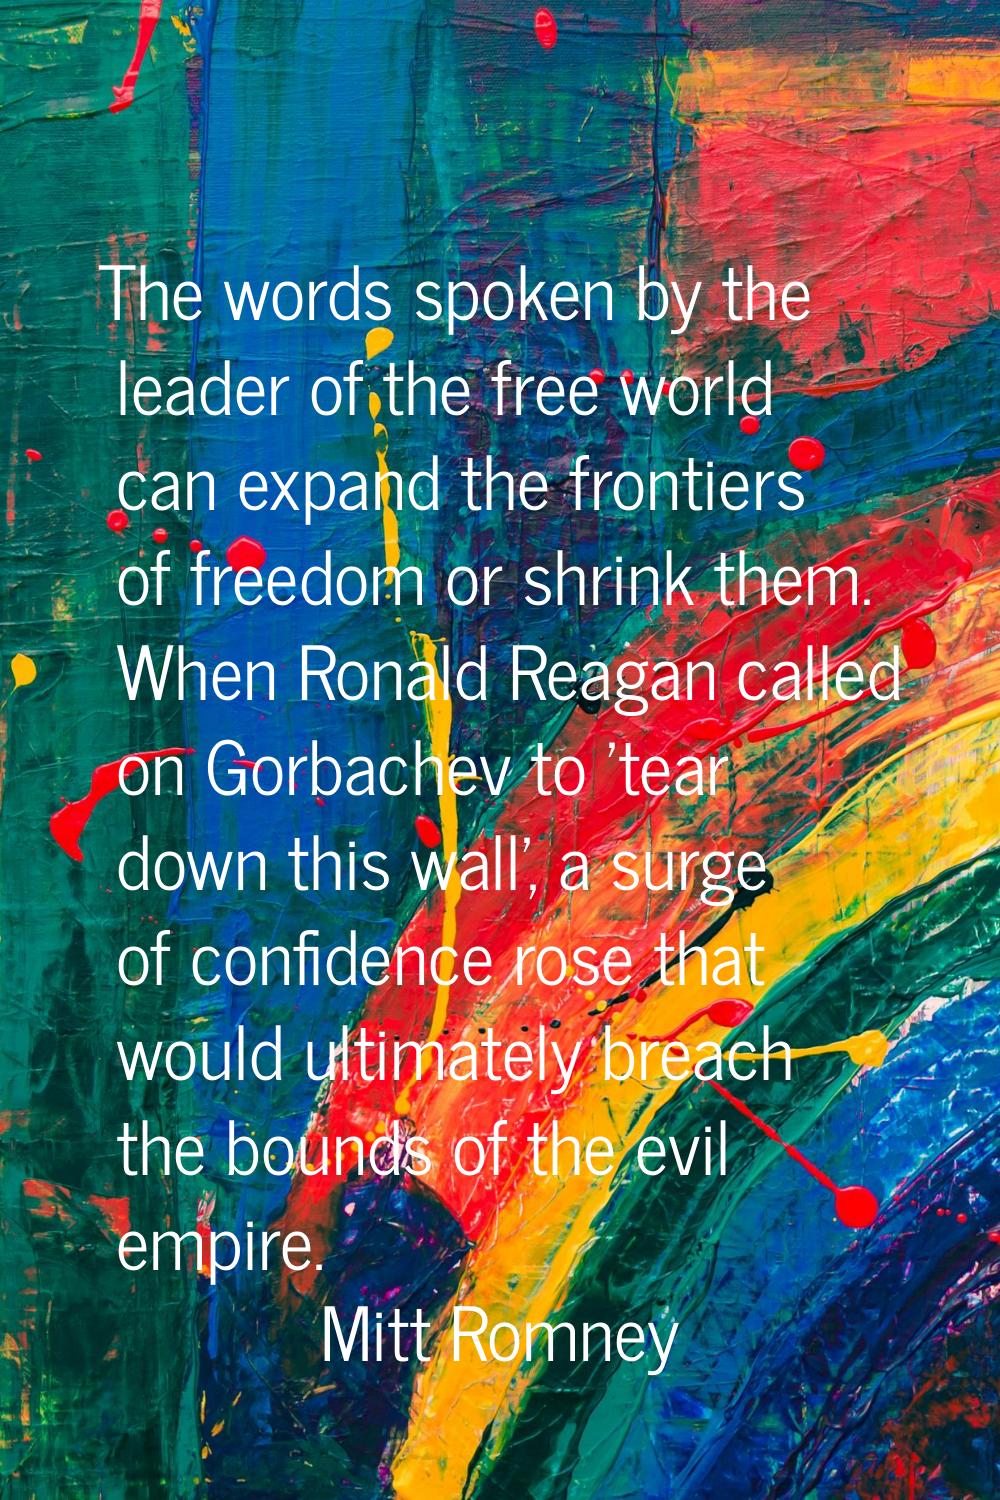 The words spoken by the leader of the free world can expand the frontiers of freedom or shrink them